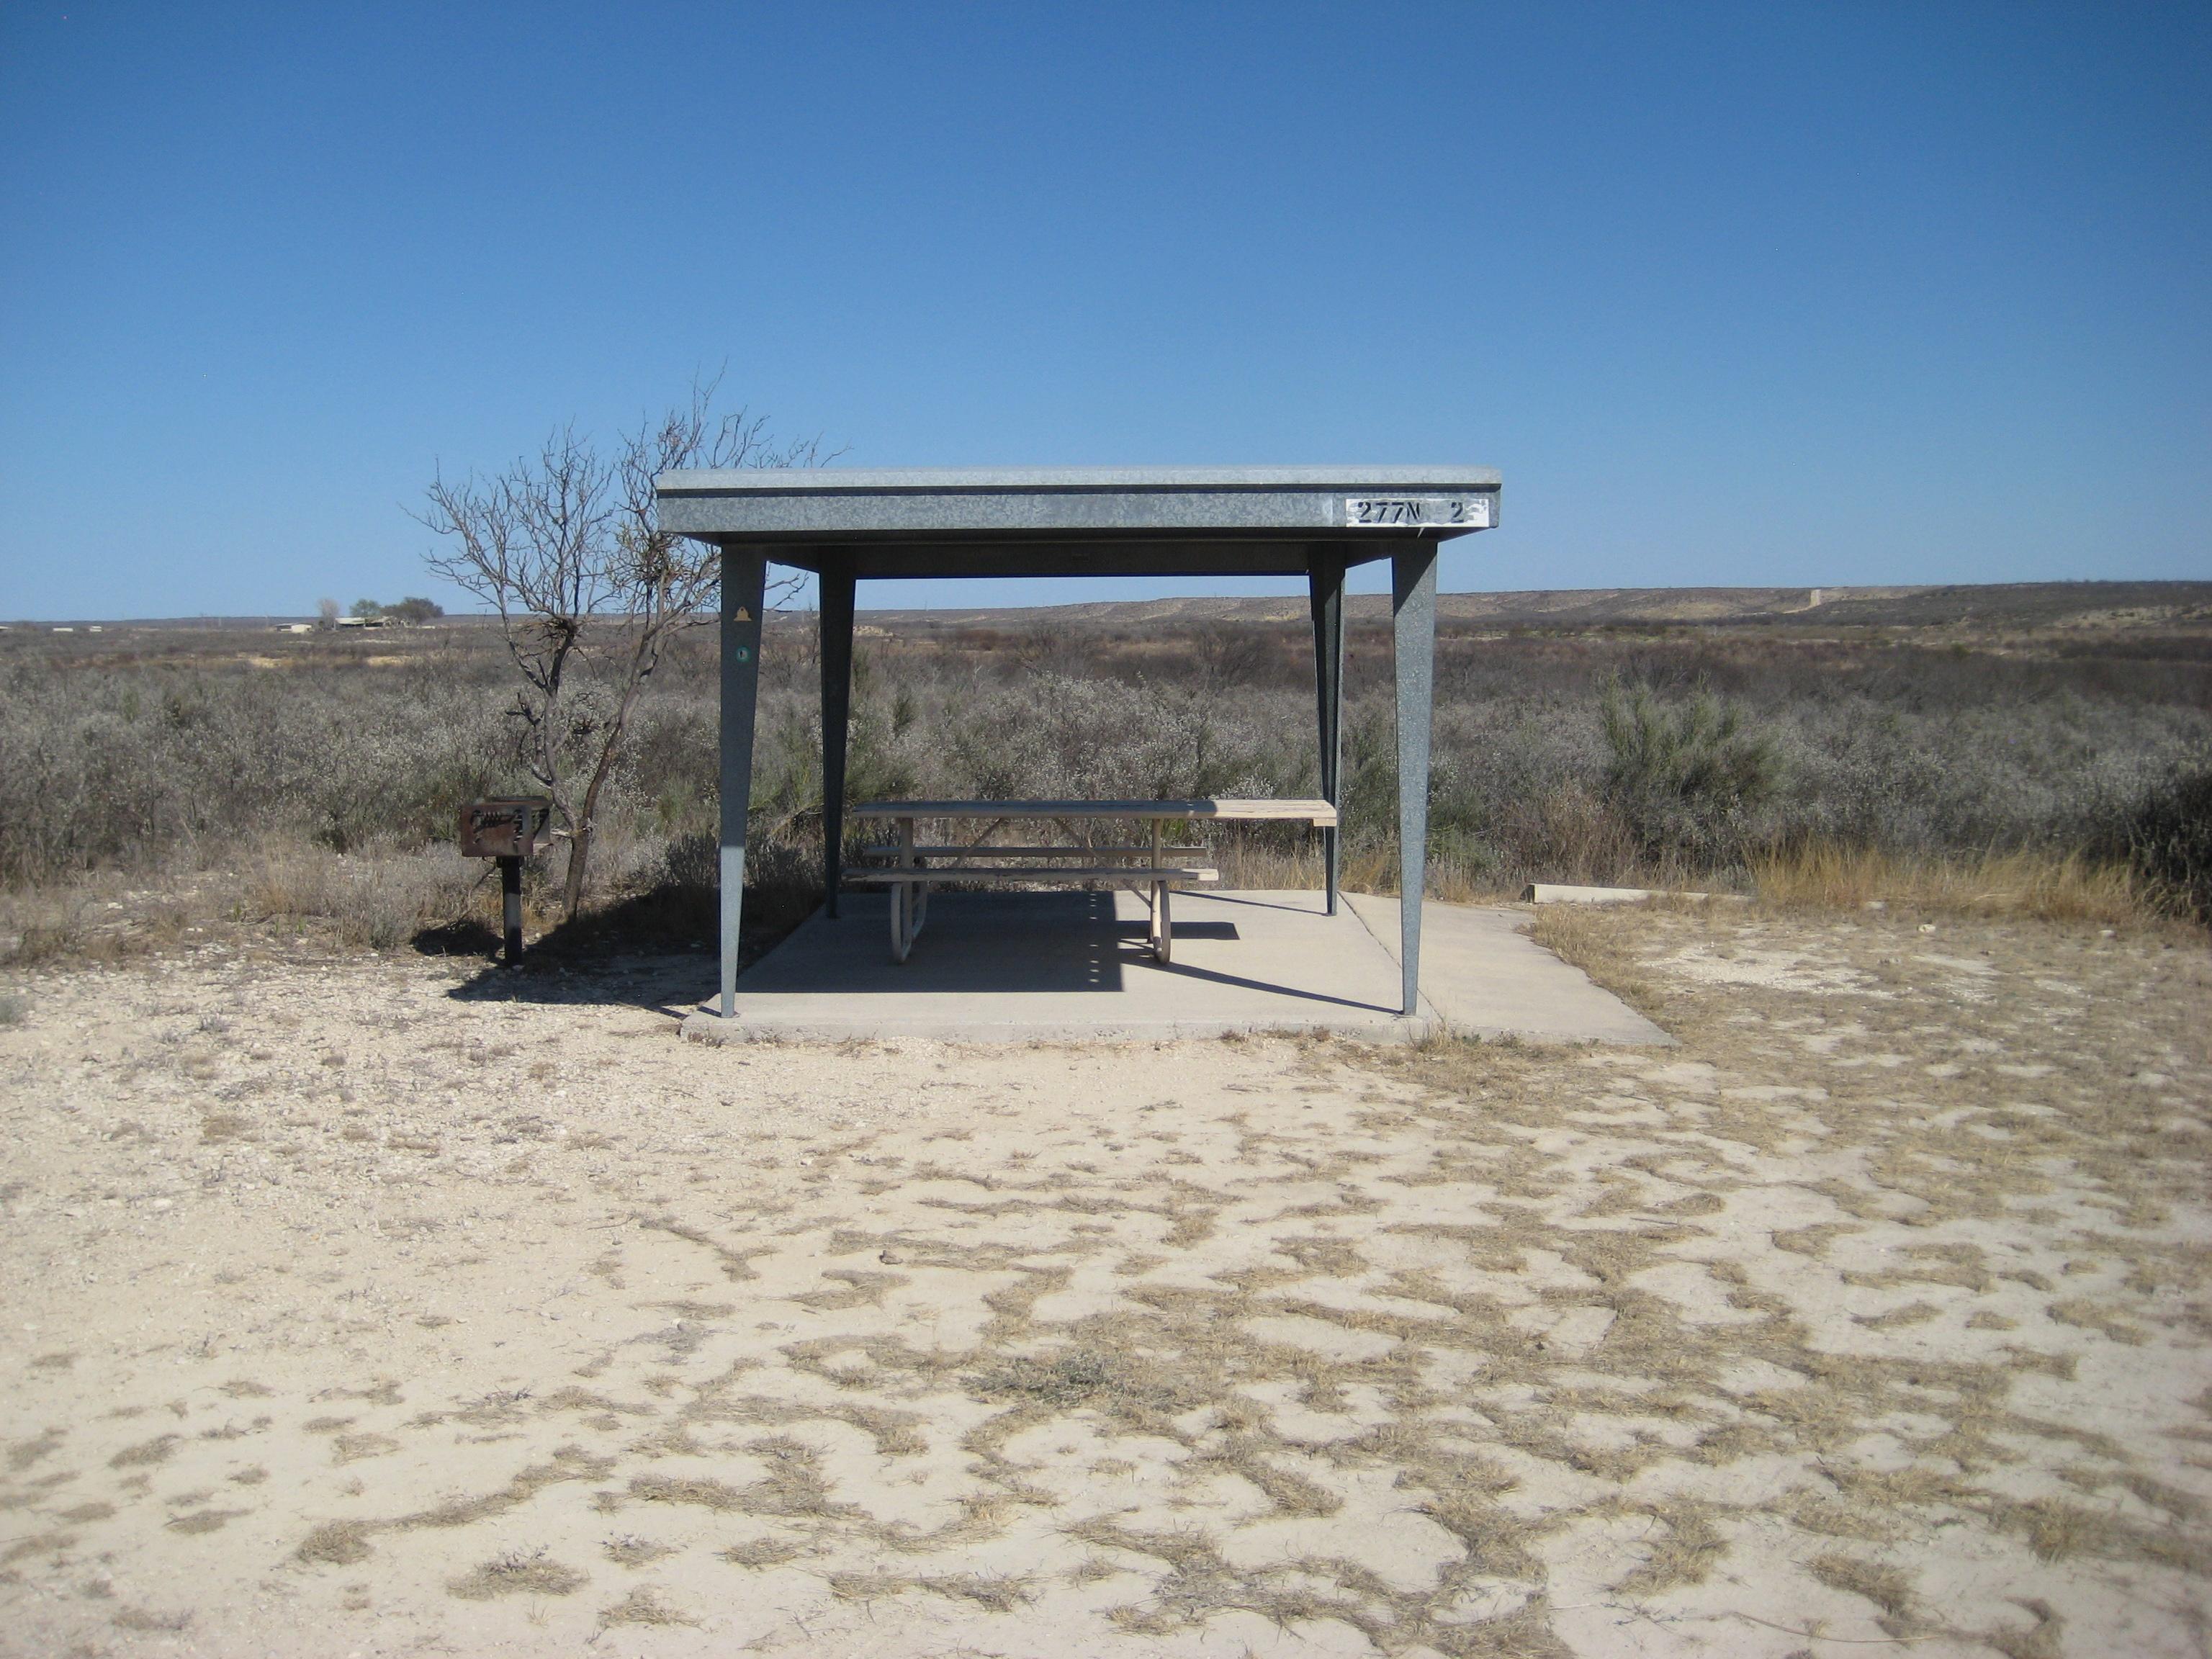 Picnic table on cement pad under metal shade shelter